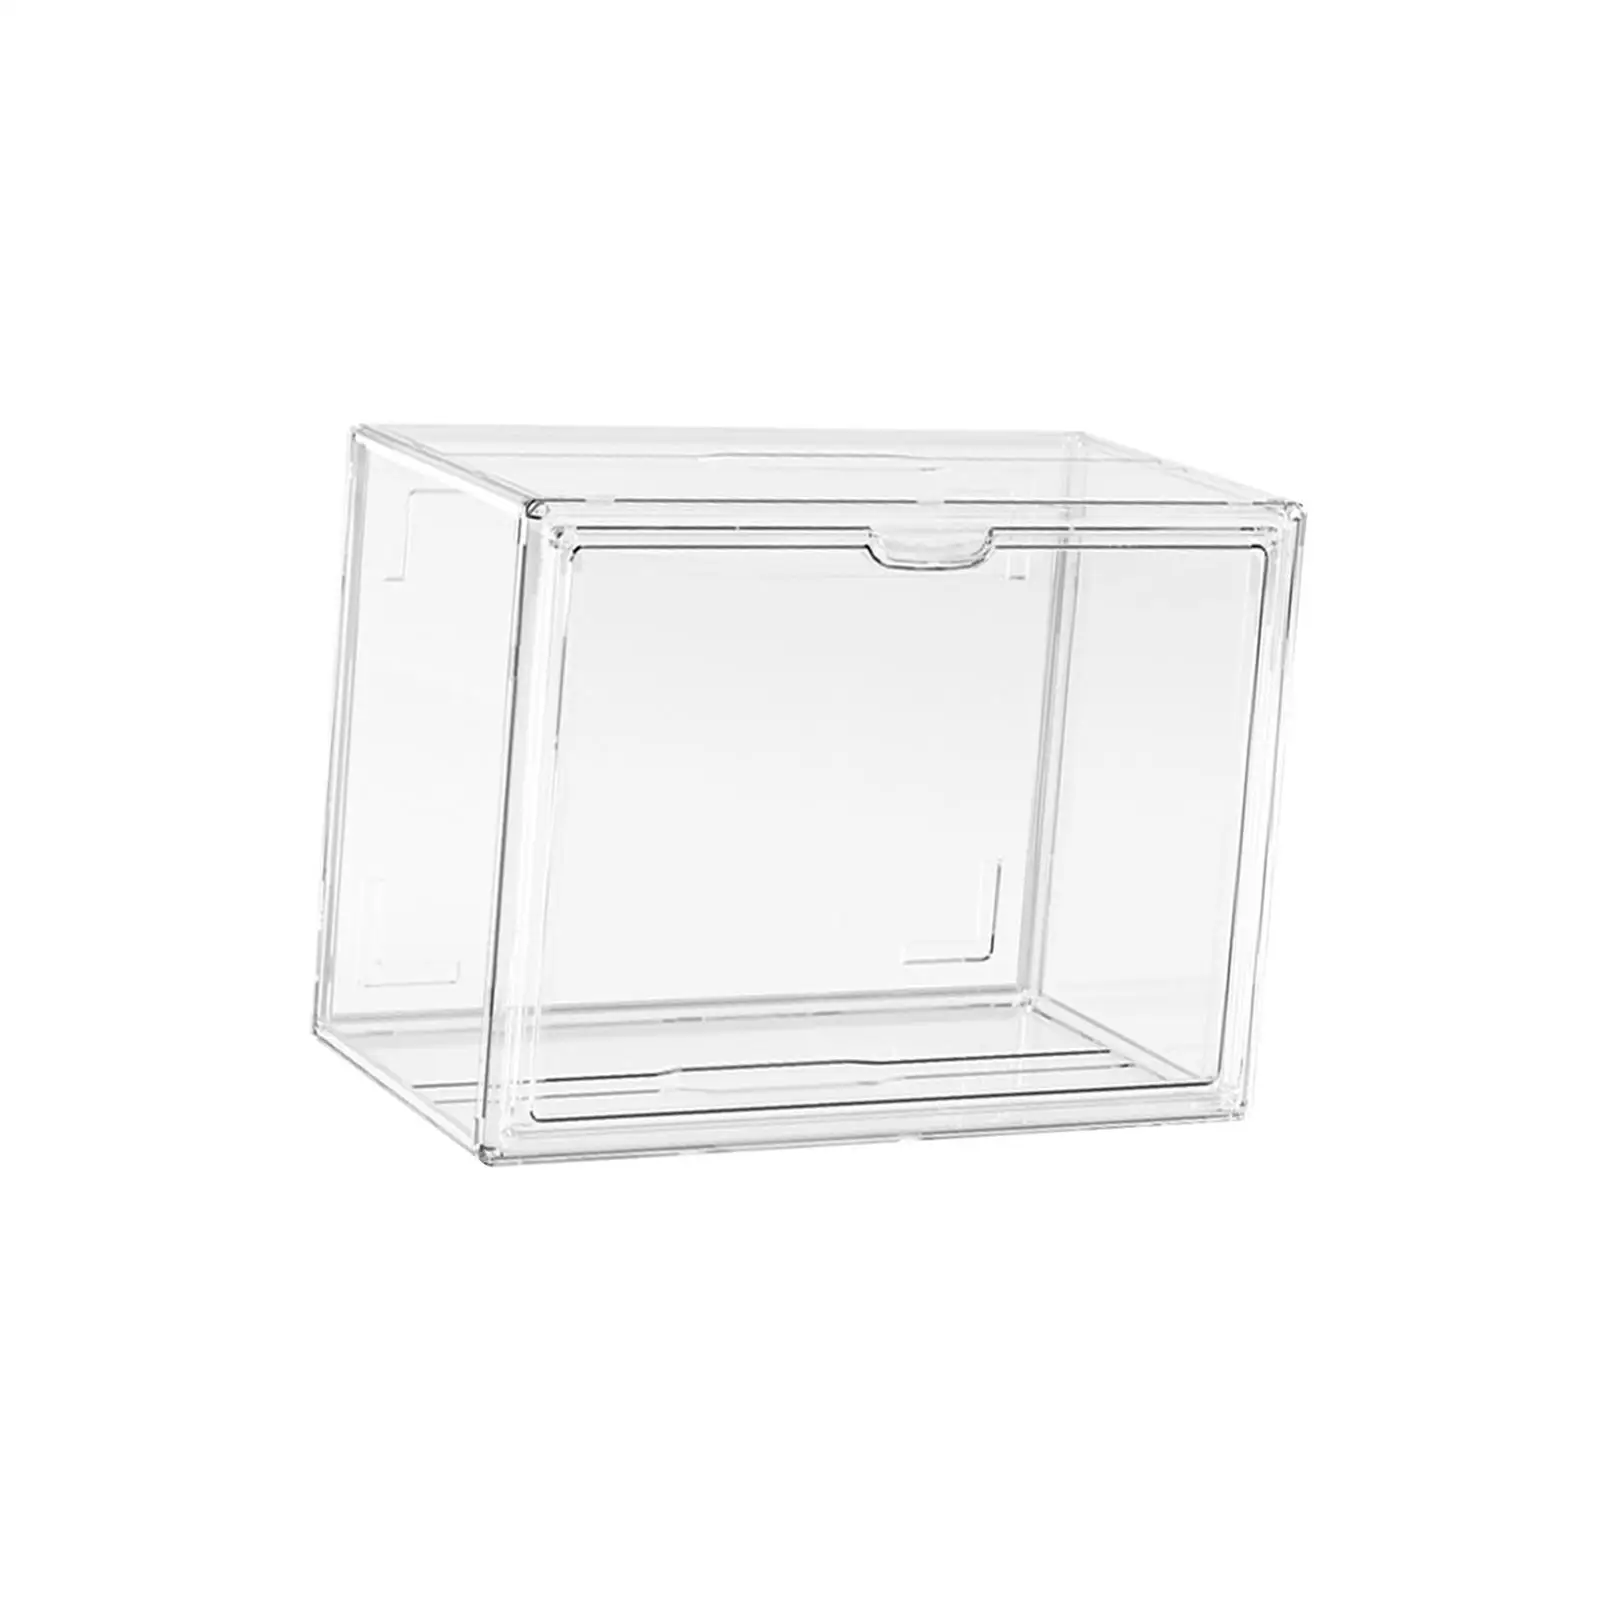 Clear Display Case Dustproof Storage Holder Cube Organizer Decoration Shelf Stand Showcase for Action Figure Toys Collectibles